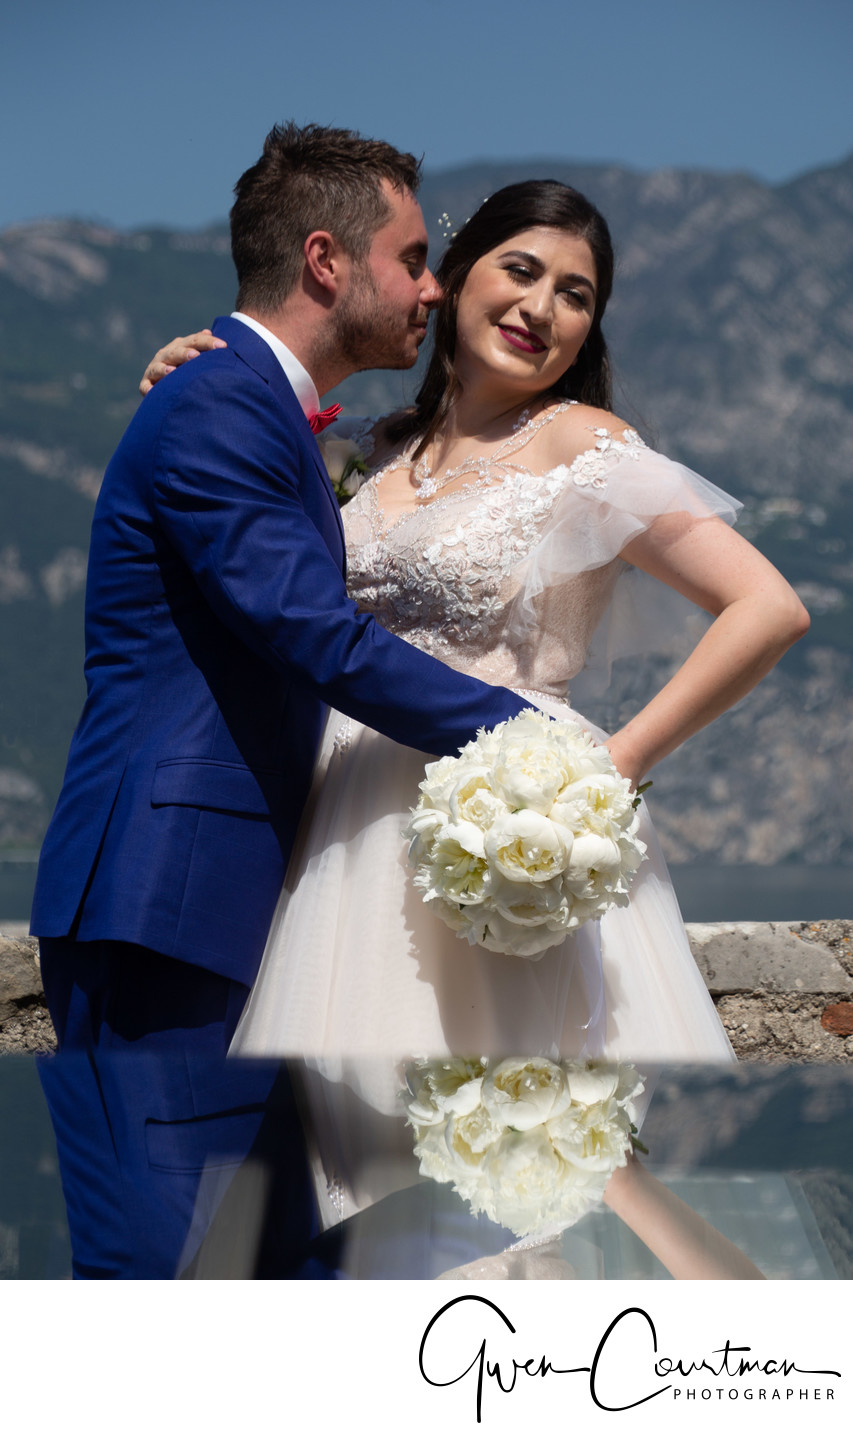 Tina and John, just married in Malcesine Castle